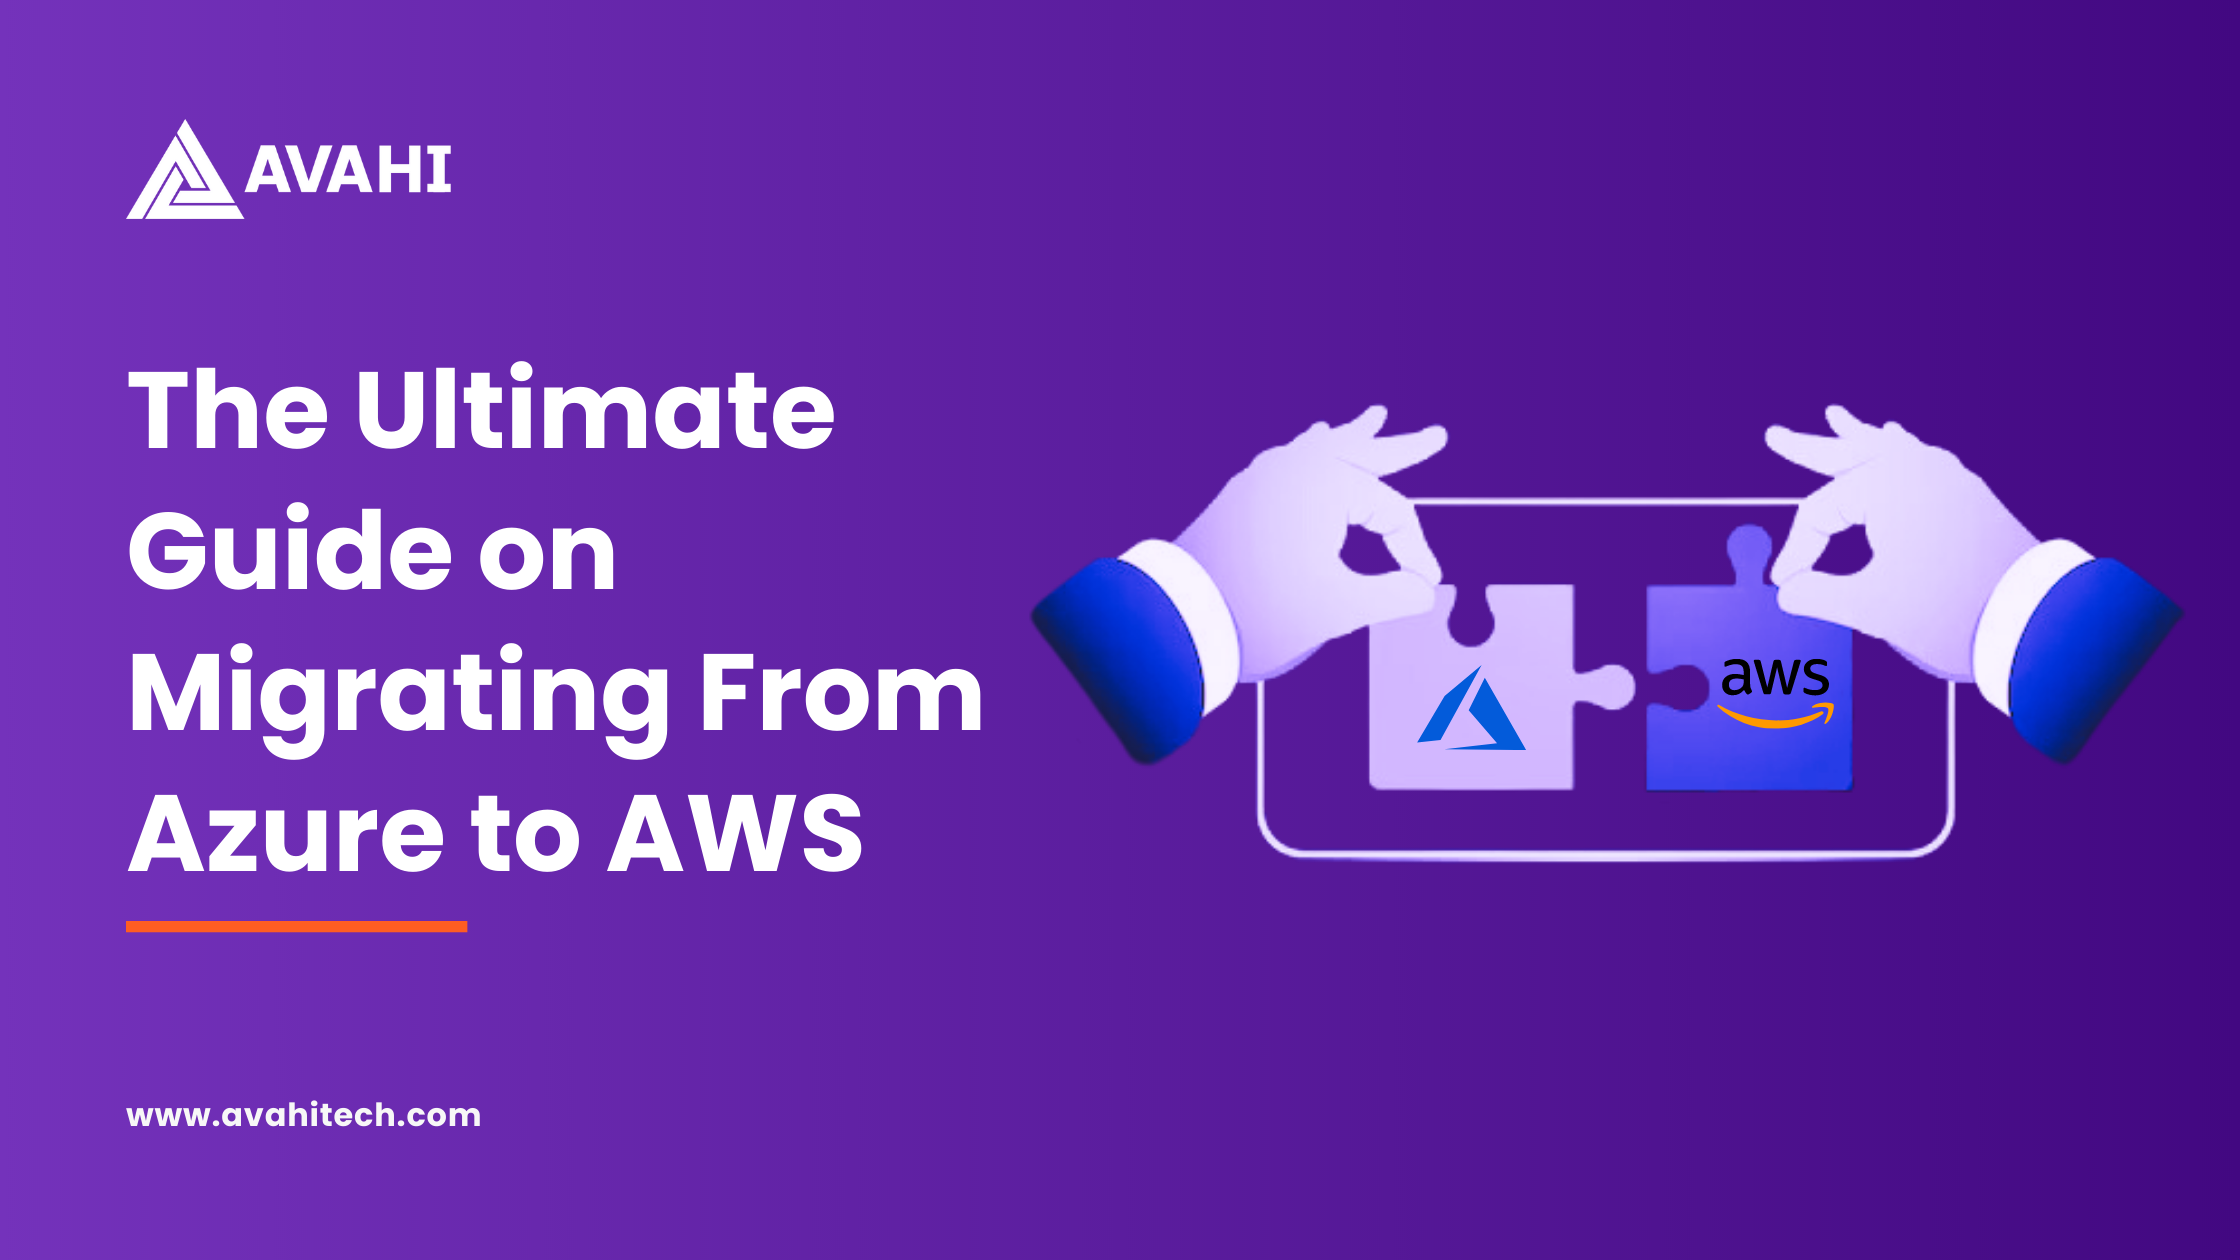 The Ultimate Guide on Migrating From Azure to AWS